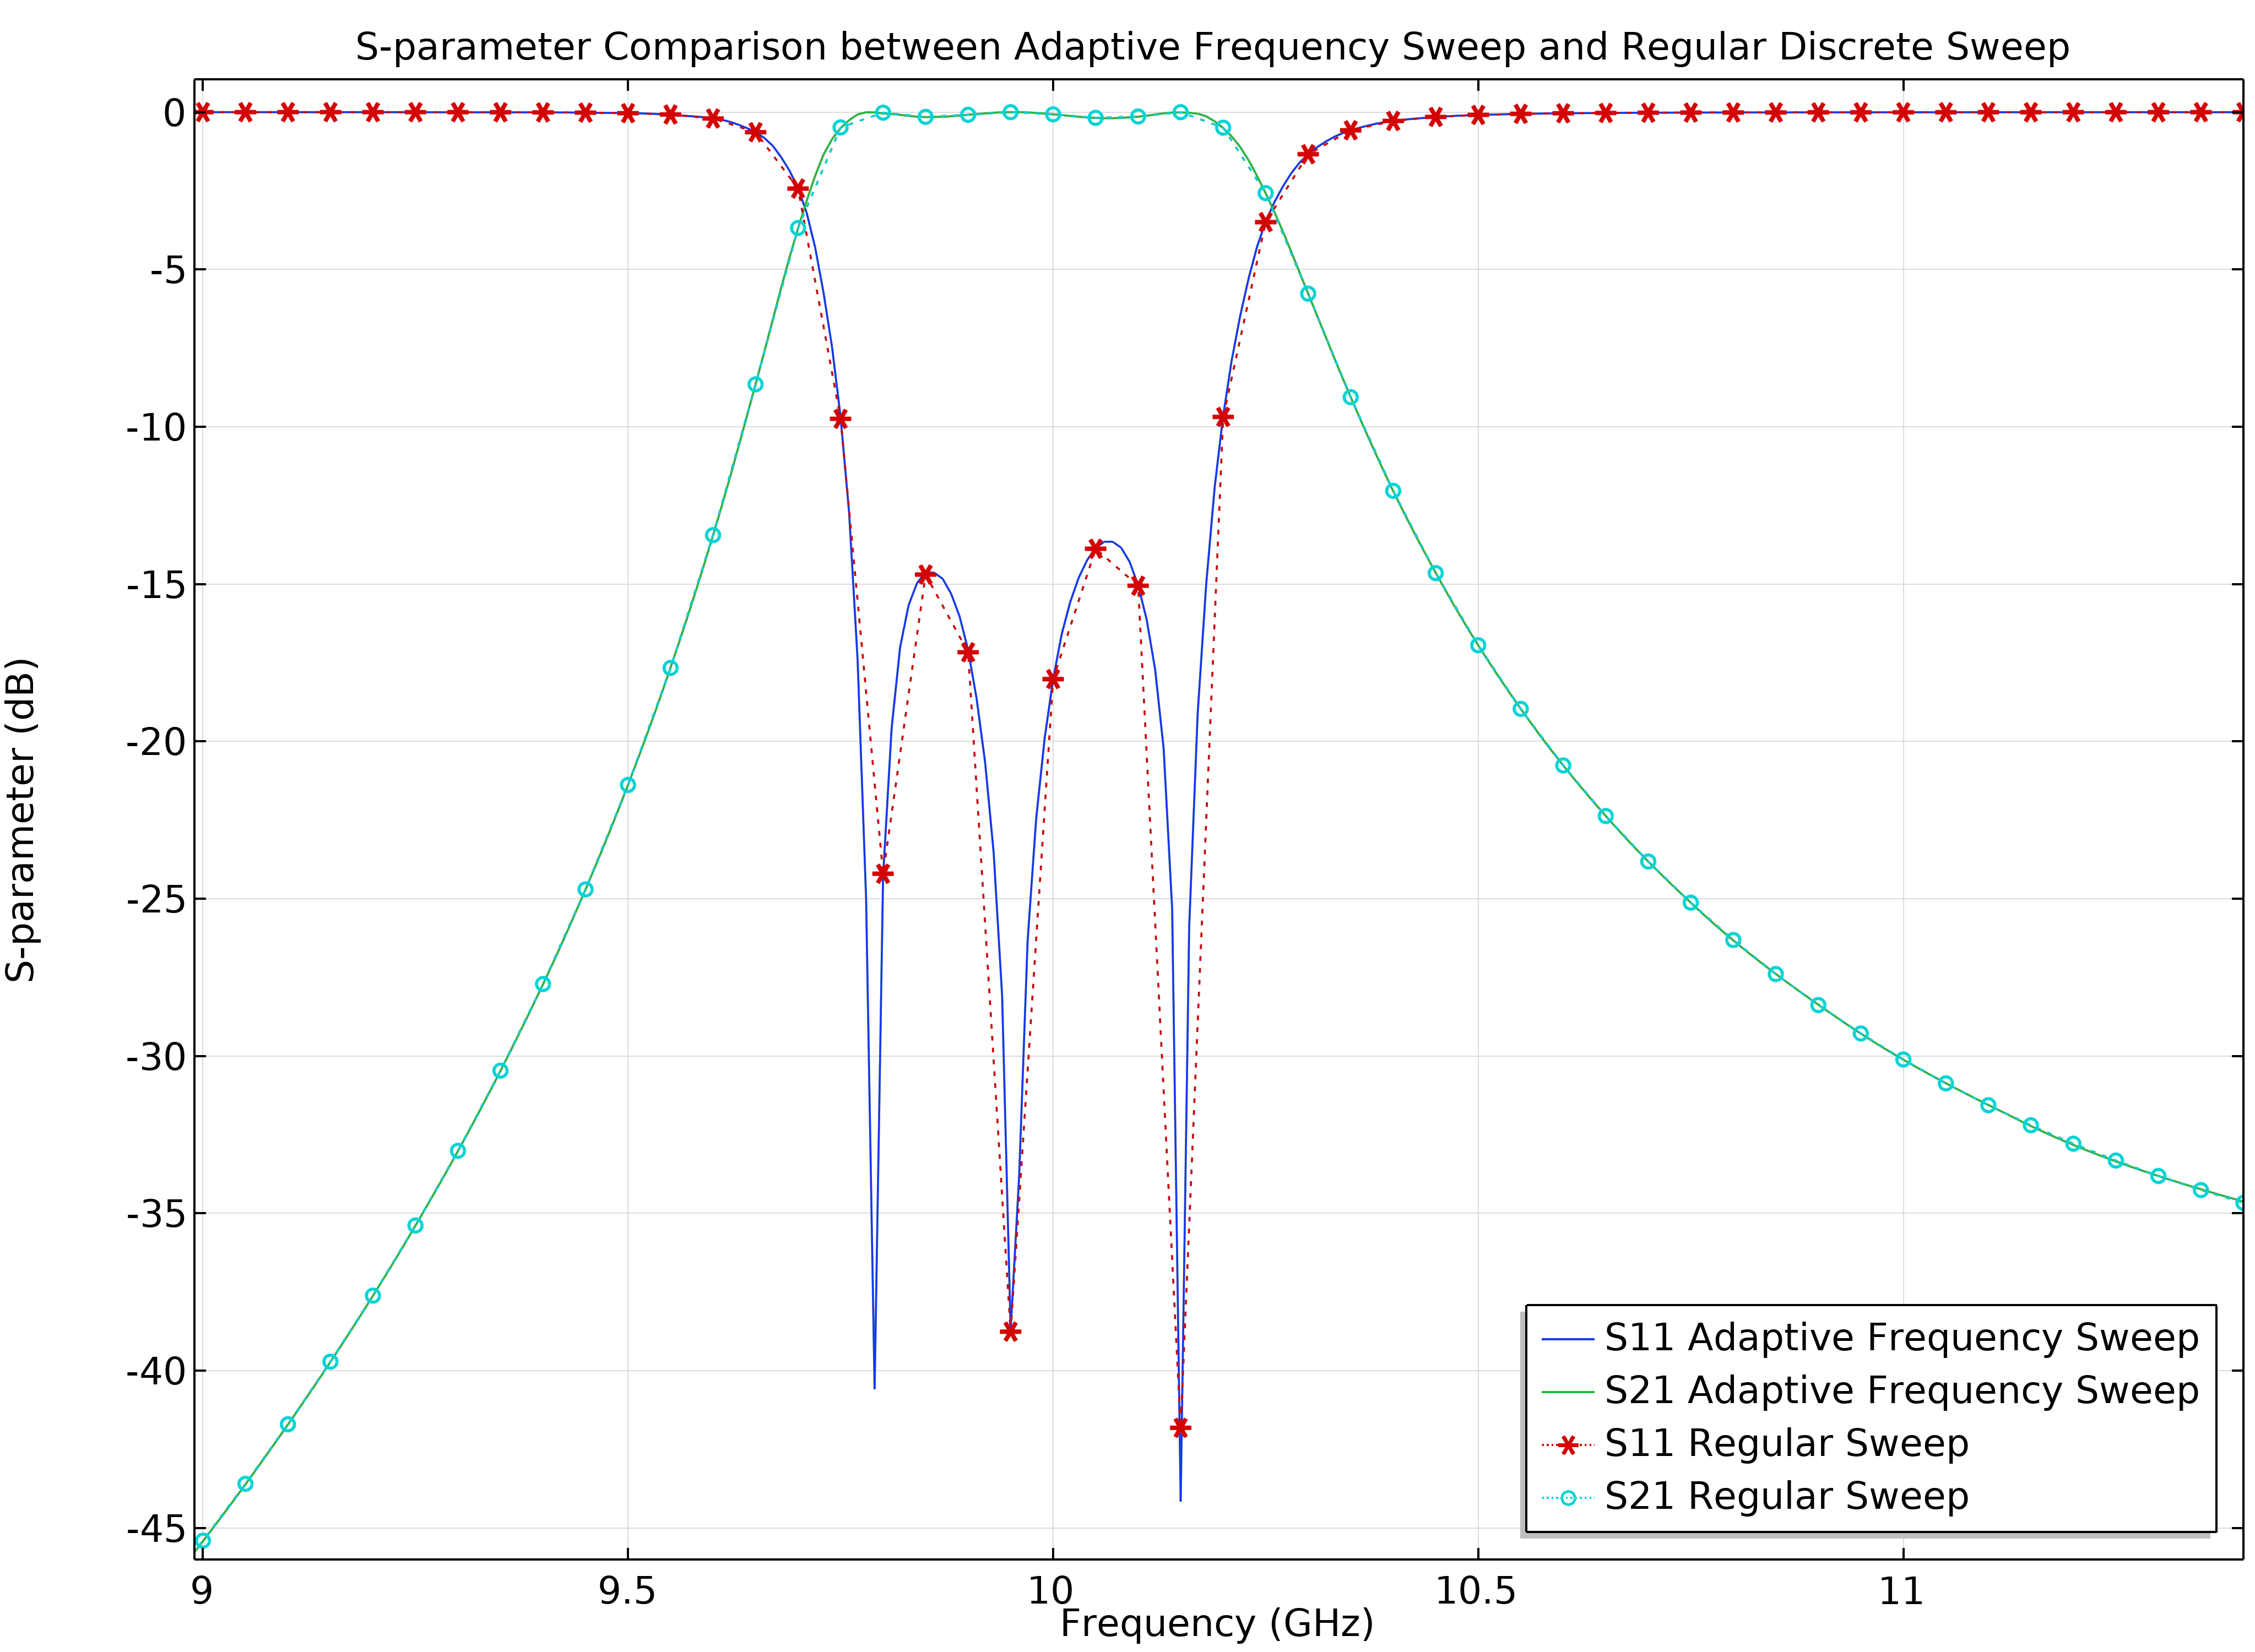 A 1D plot with frequency on the x-axis and S-parameter on the y-axis.